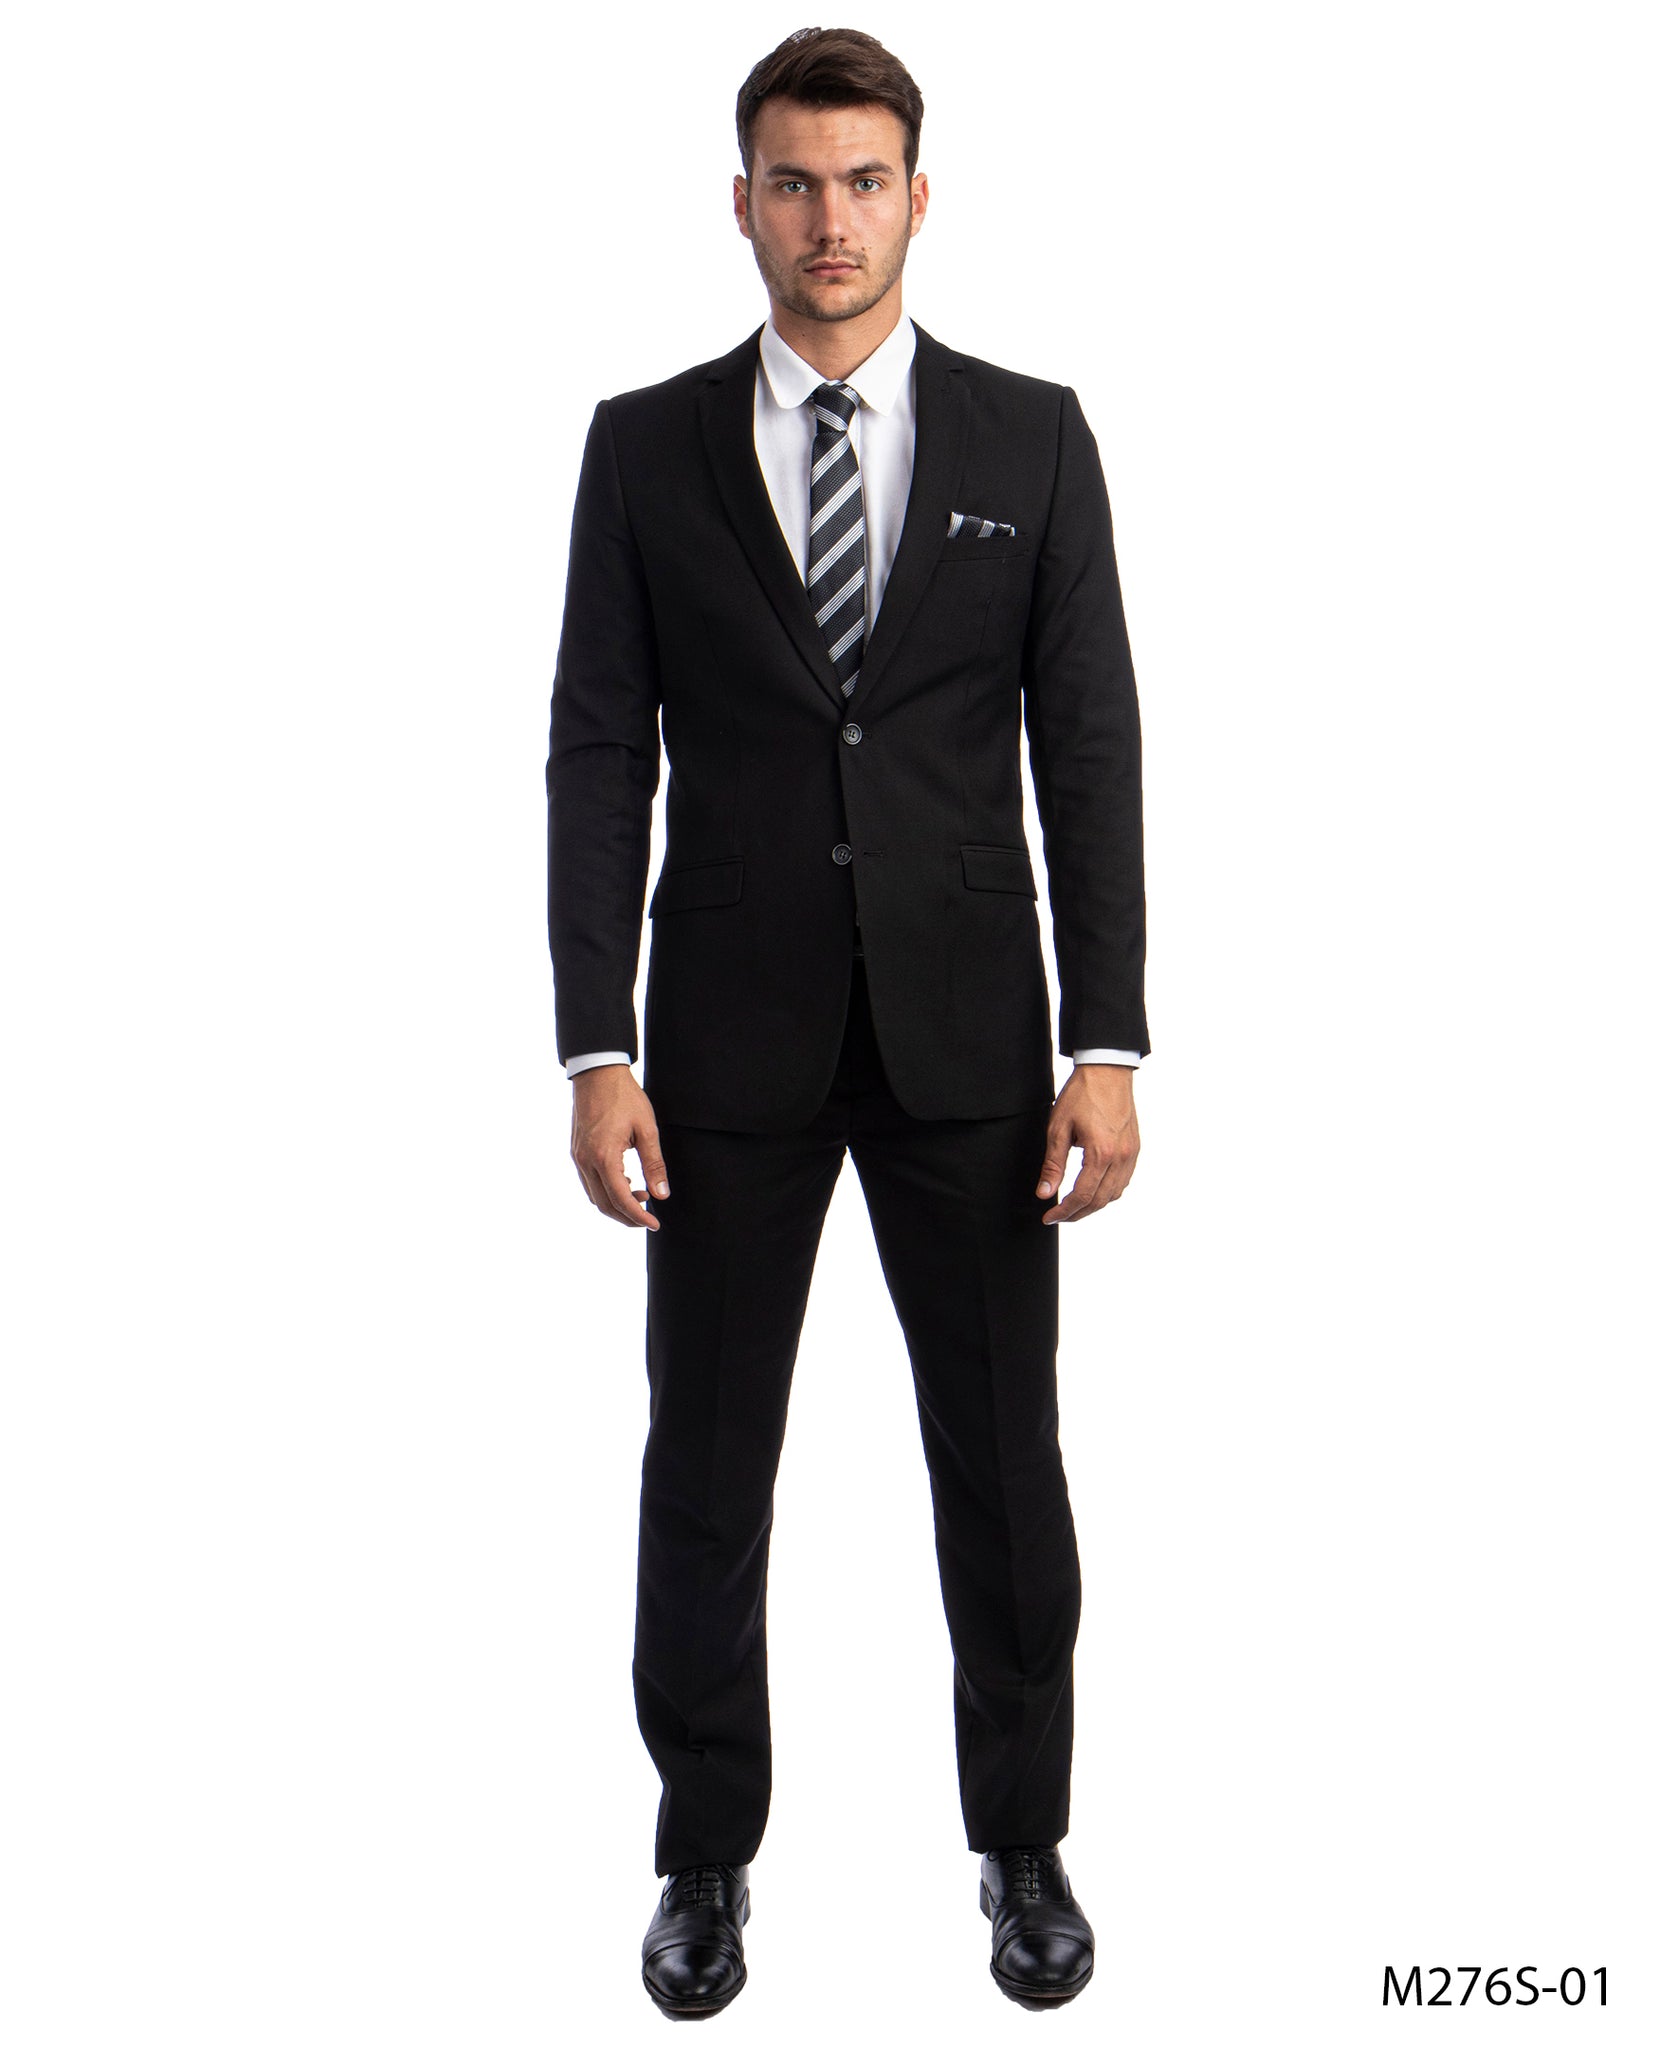 Black  Suit For Men Formal Suits For All Ocassions